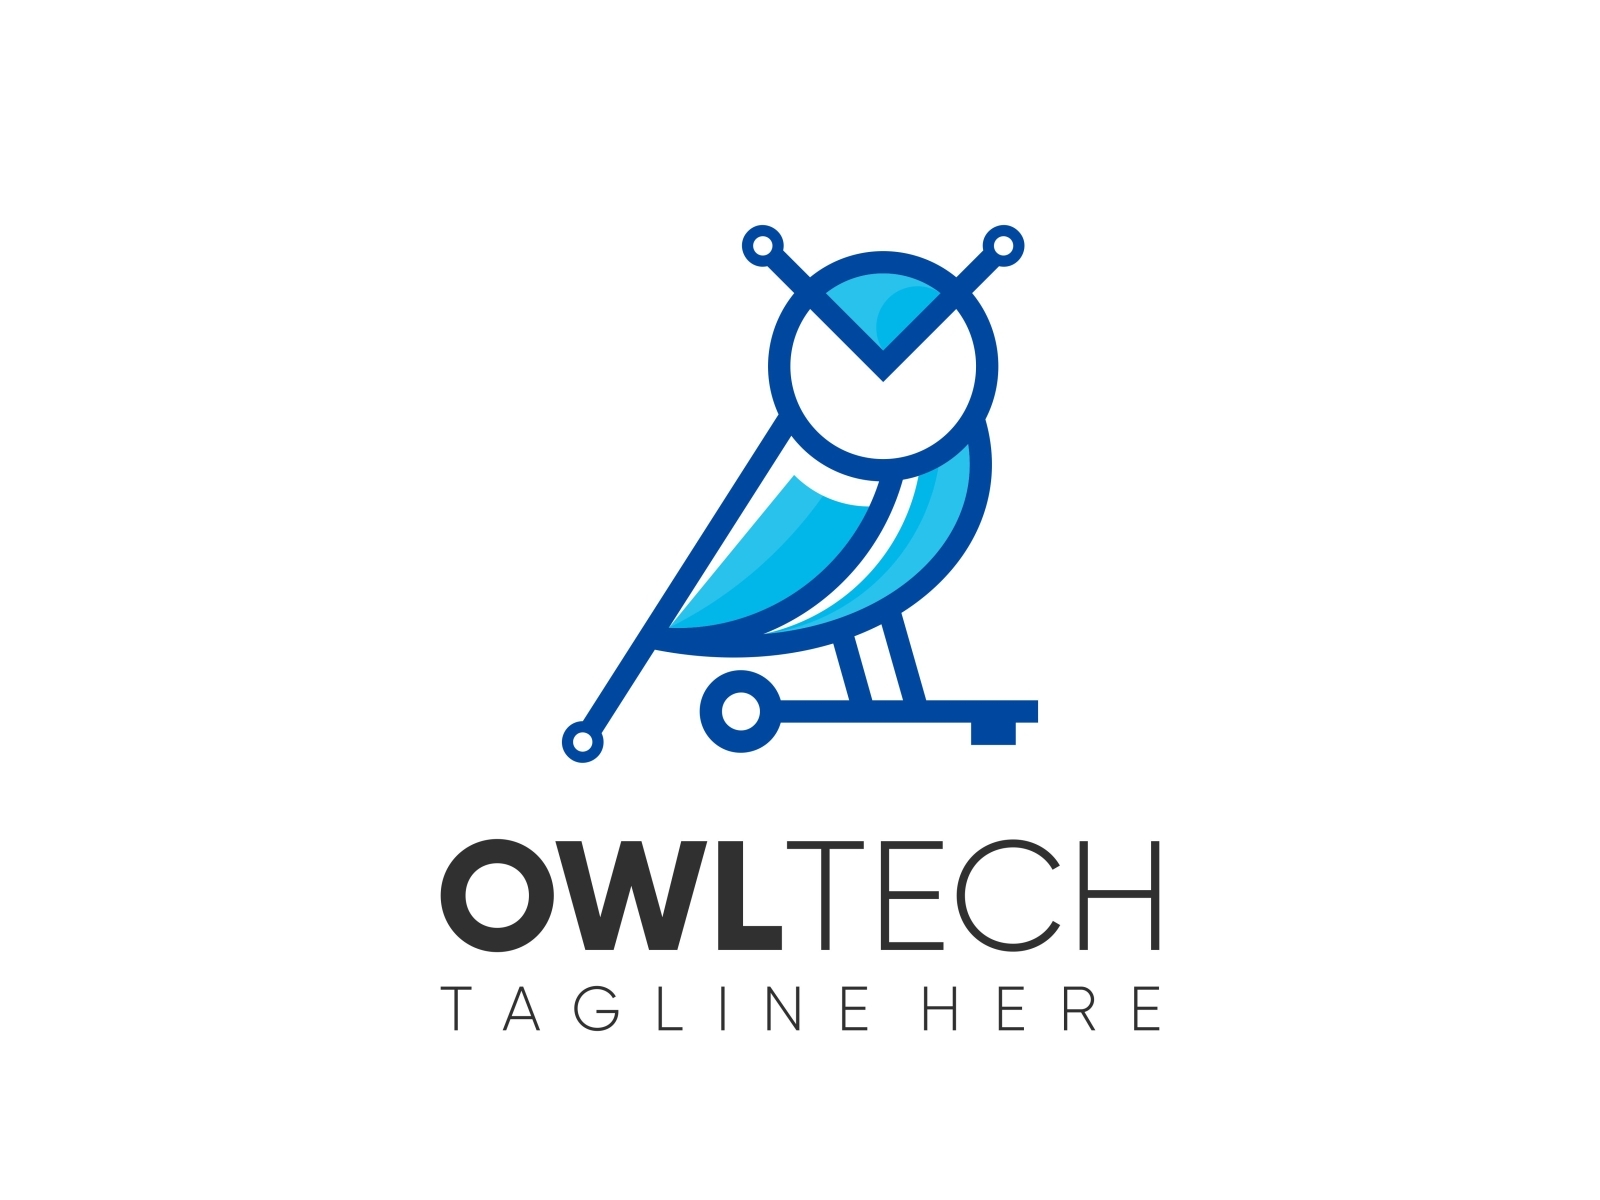 owl by nanas870 on Dribbble